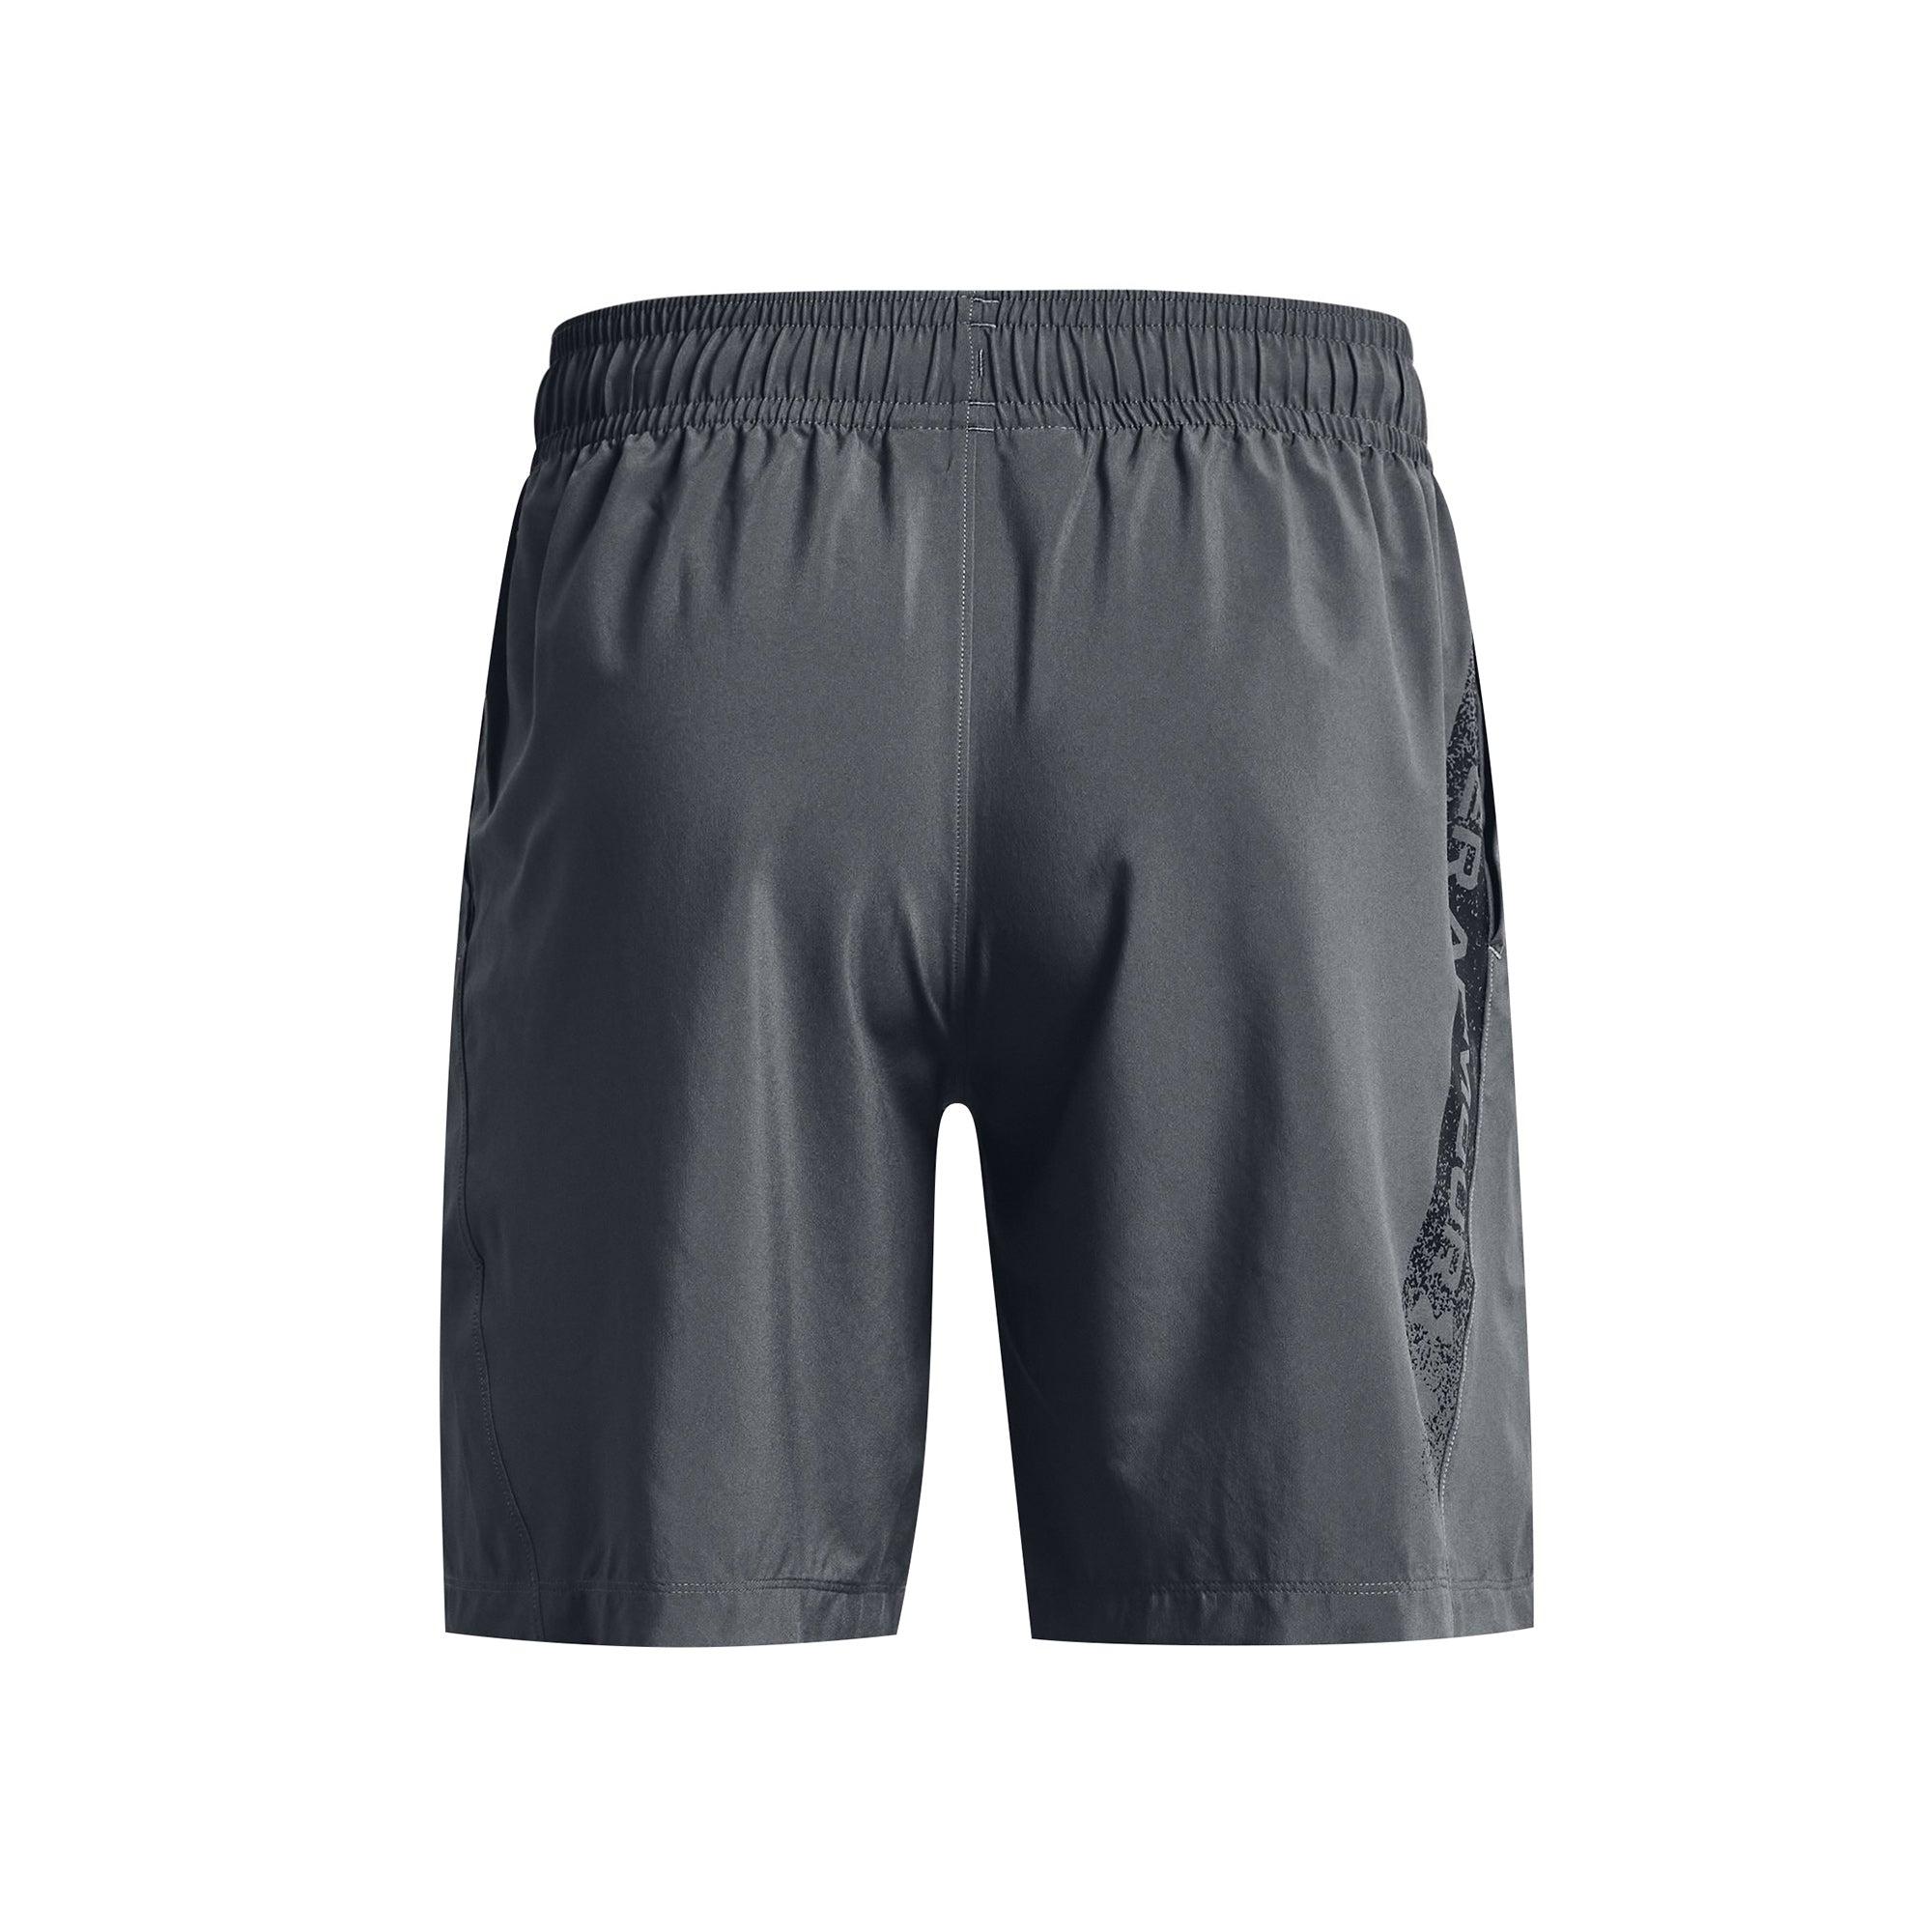 Quần ngắn thể thao nam Under Armour Woven Graphic - 1370388-012